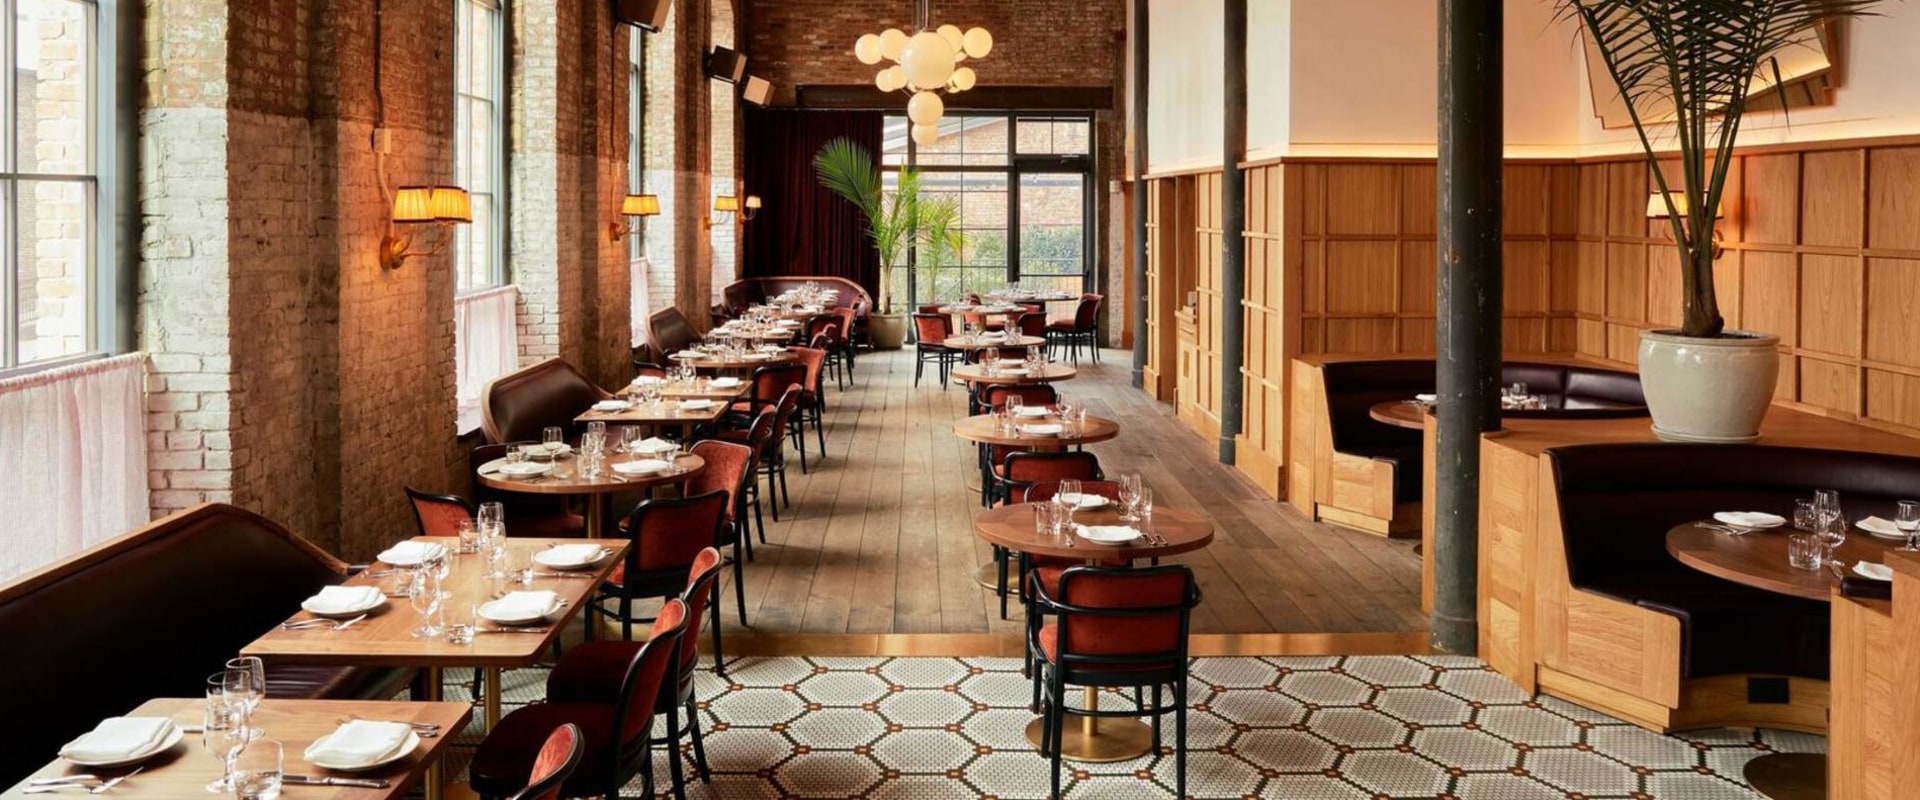 The Best Places for Food and Dining in New York City